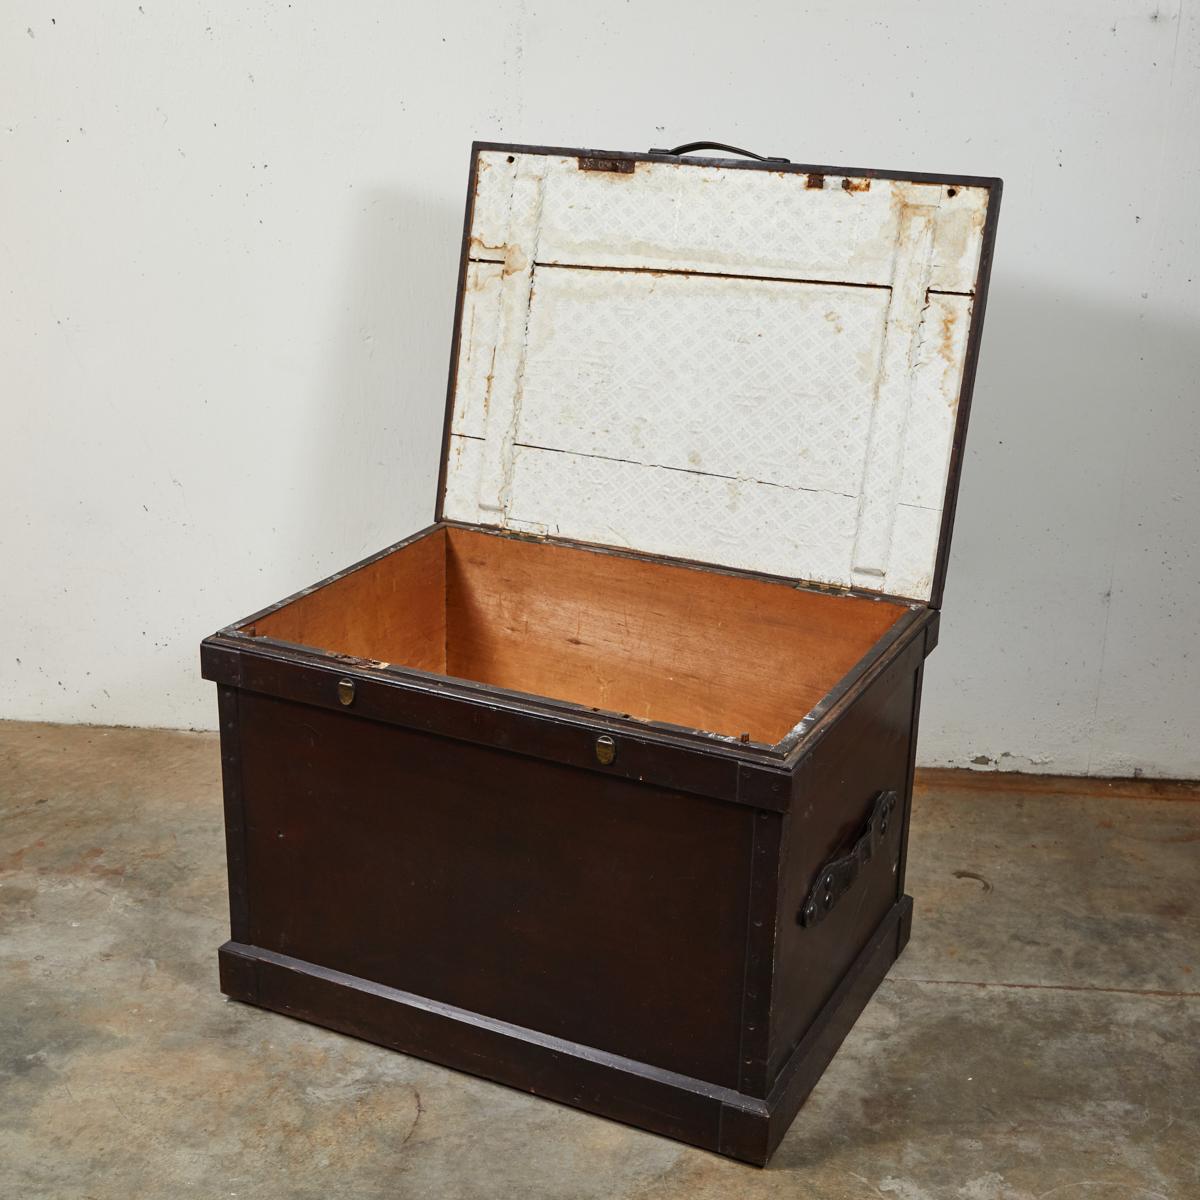 1860s English Large Painted Camphorwood Silver Chest with Leather Handles In Good Condition For Sale In Los Angeles, CA